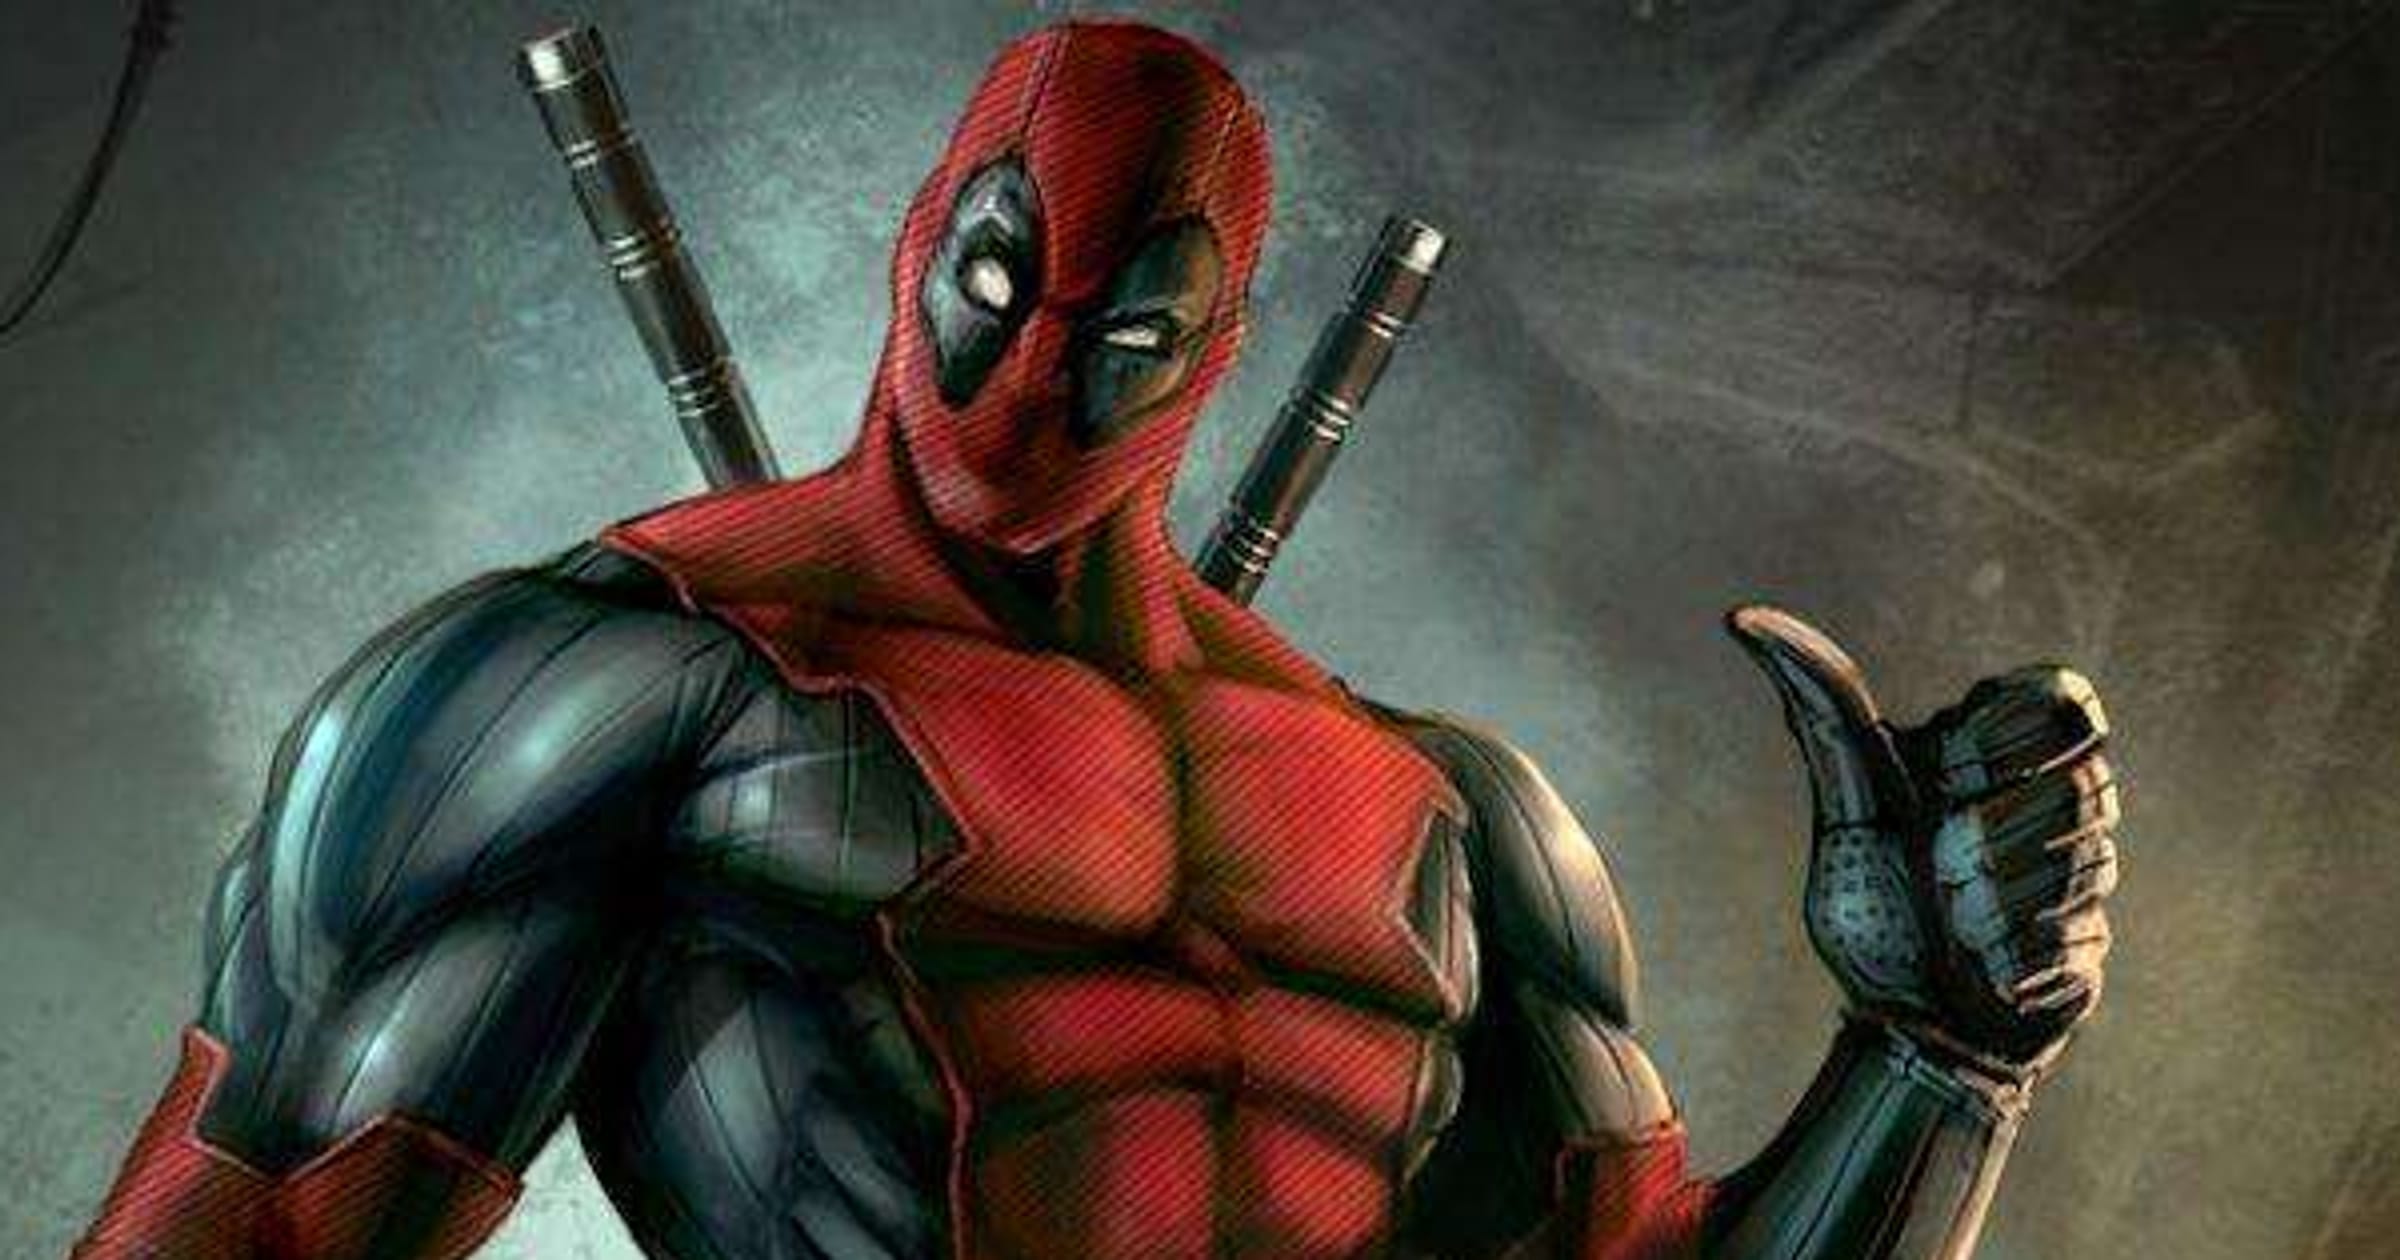 Even if you find Deadpool funny, you won't get much out of